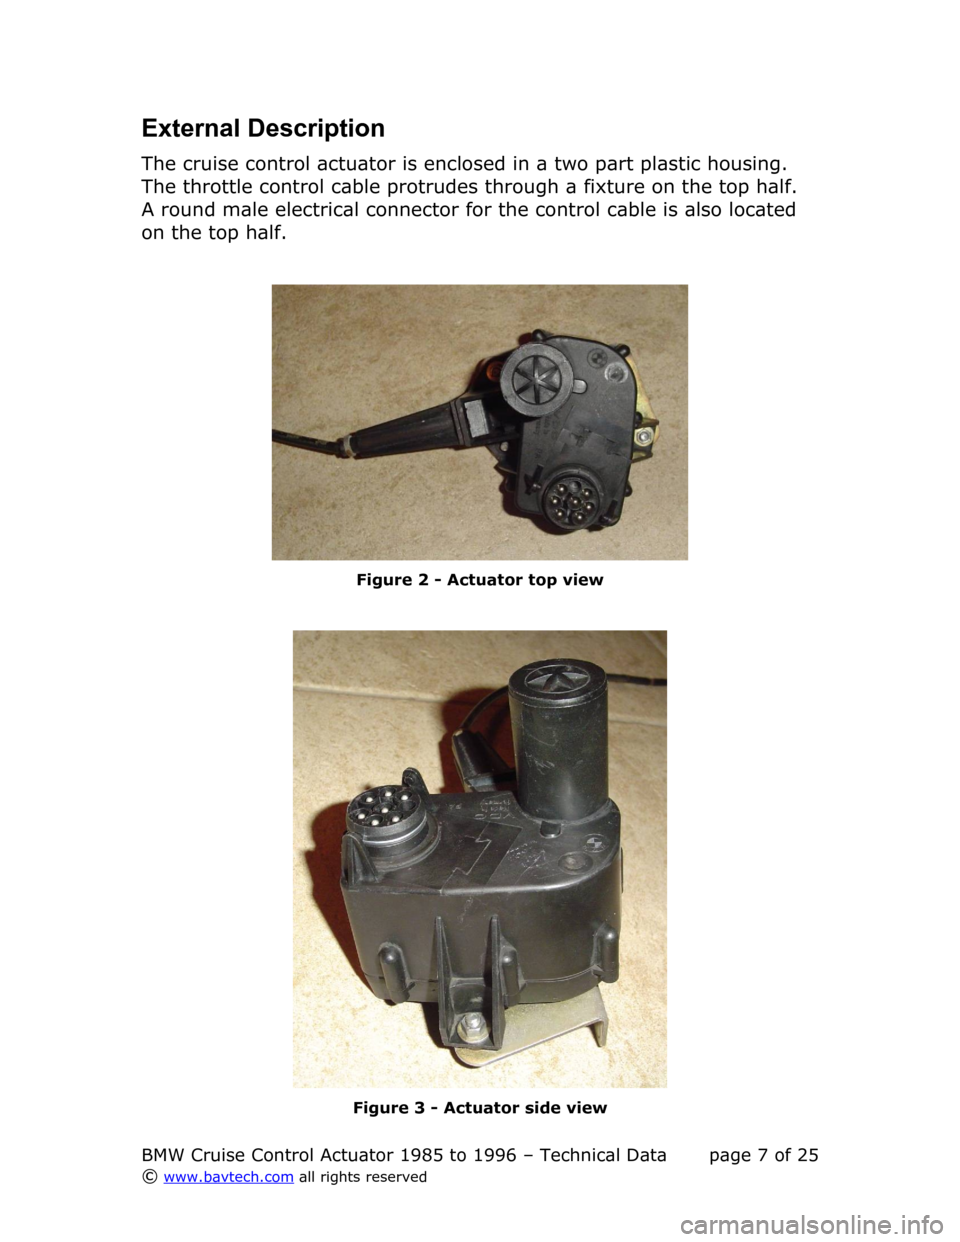 BMW 3 SERIES 1992 E36 Cruise Control Acutator External Description
The cruise control actuator is enclosed in a two part plastic housing.  
The throttle control cable protrudes through a fixture on the top half.  
A round male electrical connecto